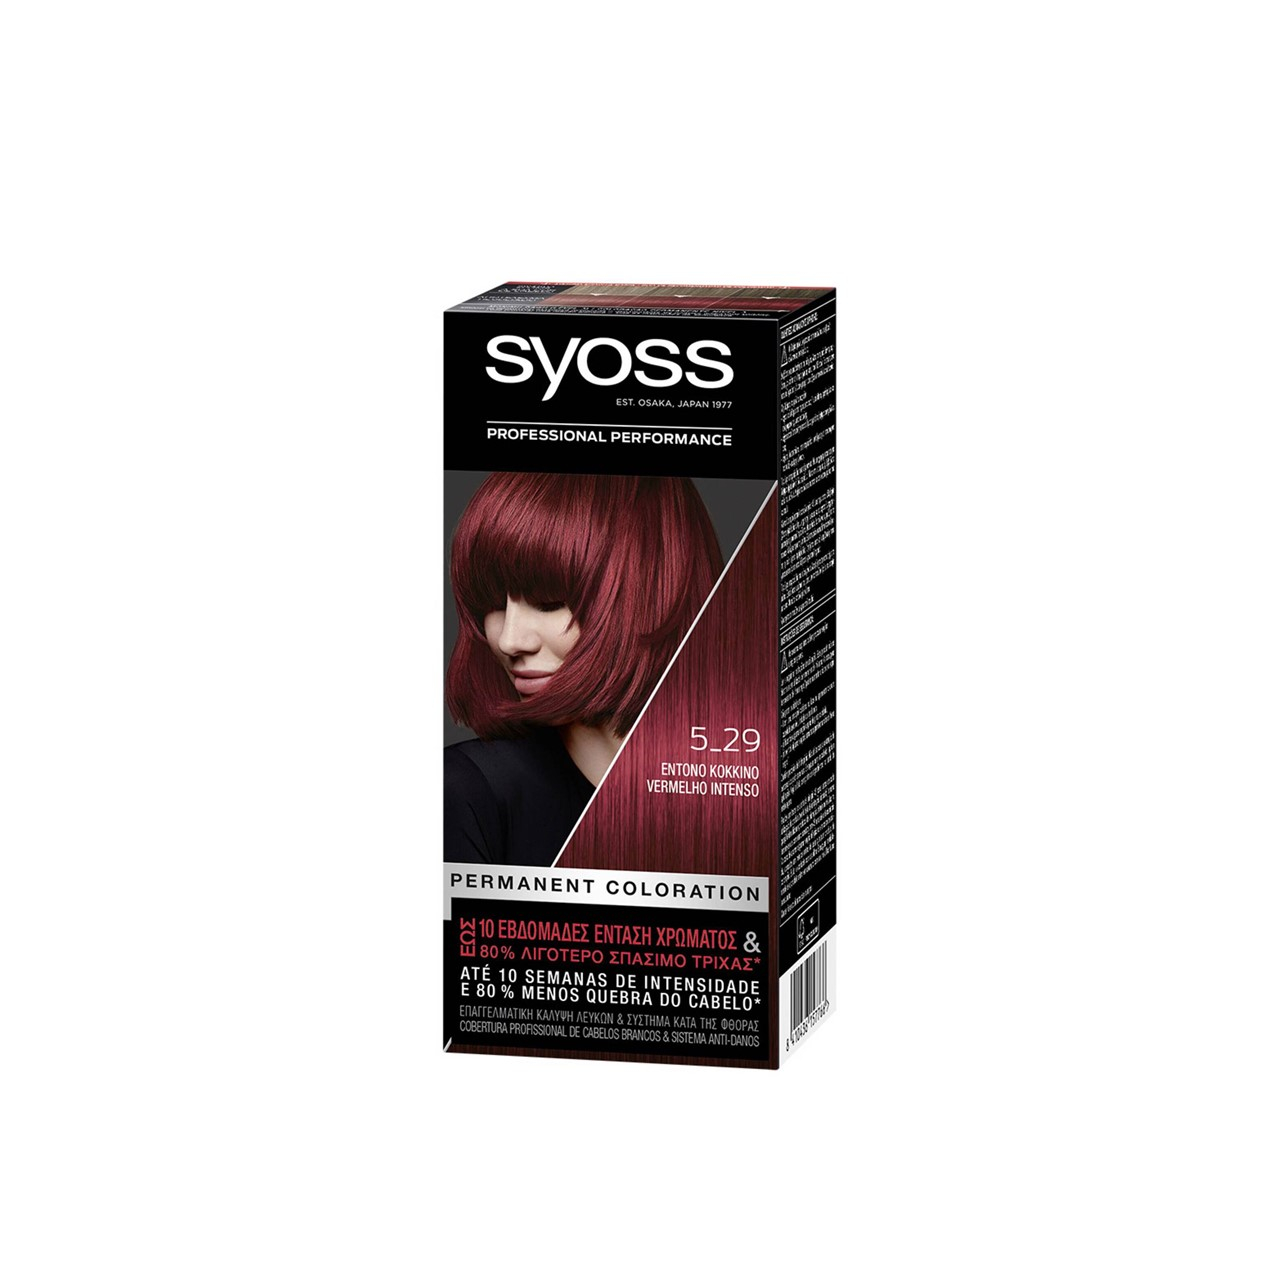 Syoss Permanent Coloration 5_29 Intense Red Permanent Hair Dye